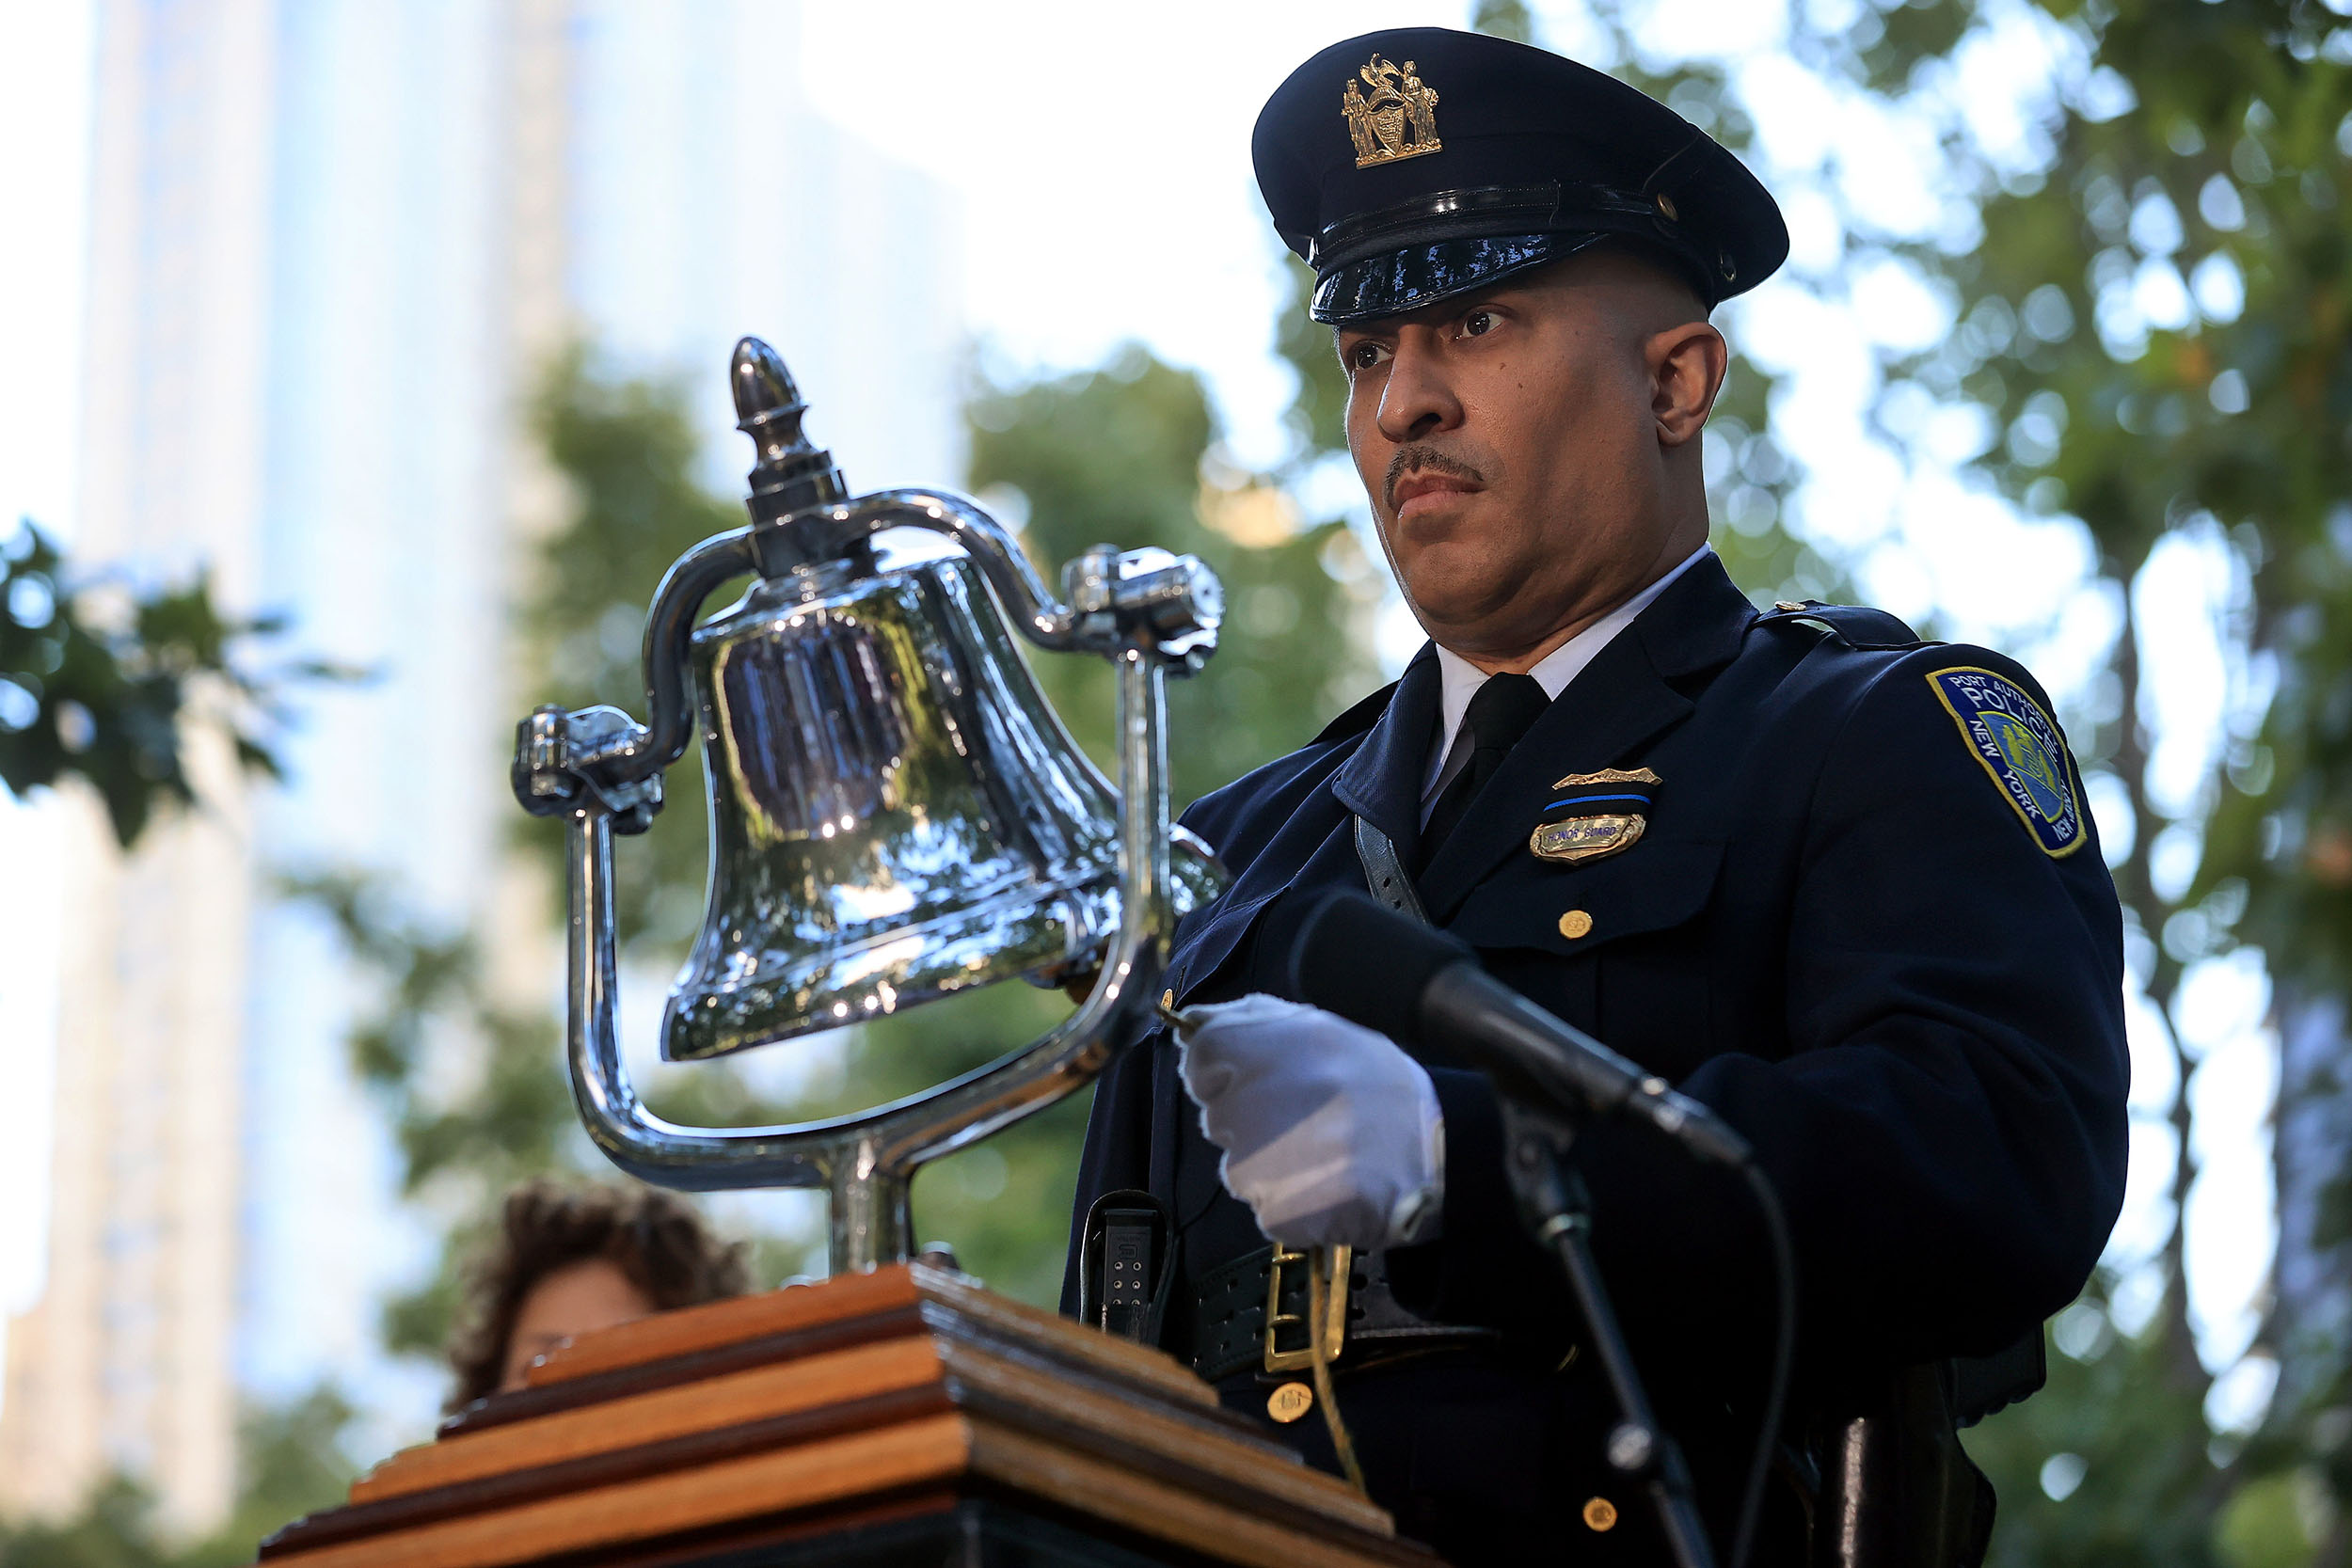 NEW YORK, NEW YORK - SEPTEMBER 11: A bell is rung during a moment of silence during the annual 9/11 Commemoration Ceremony at the National 9/11 Memorial and Museum on September 11, 2021 in New York City. During the ceremony six moments of silence were held, marking when each of the World Trade Center towers was struck and fell and the times corresponding to the attack on the Pentagon and the crash of Flight 93. The nation is marking the 20th anniversary of the terror attacks of September 11, 2001, when the terrorist group al-Qaeda flew hijacked airplanes into the World Trade Center, Shanksville, PA and the Pentagon, killing nearly 3,000 people. (Photo by Chip Somodevilla/Getty Images)